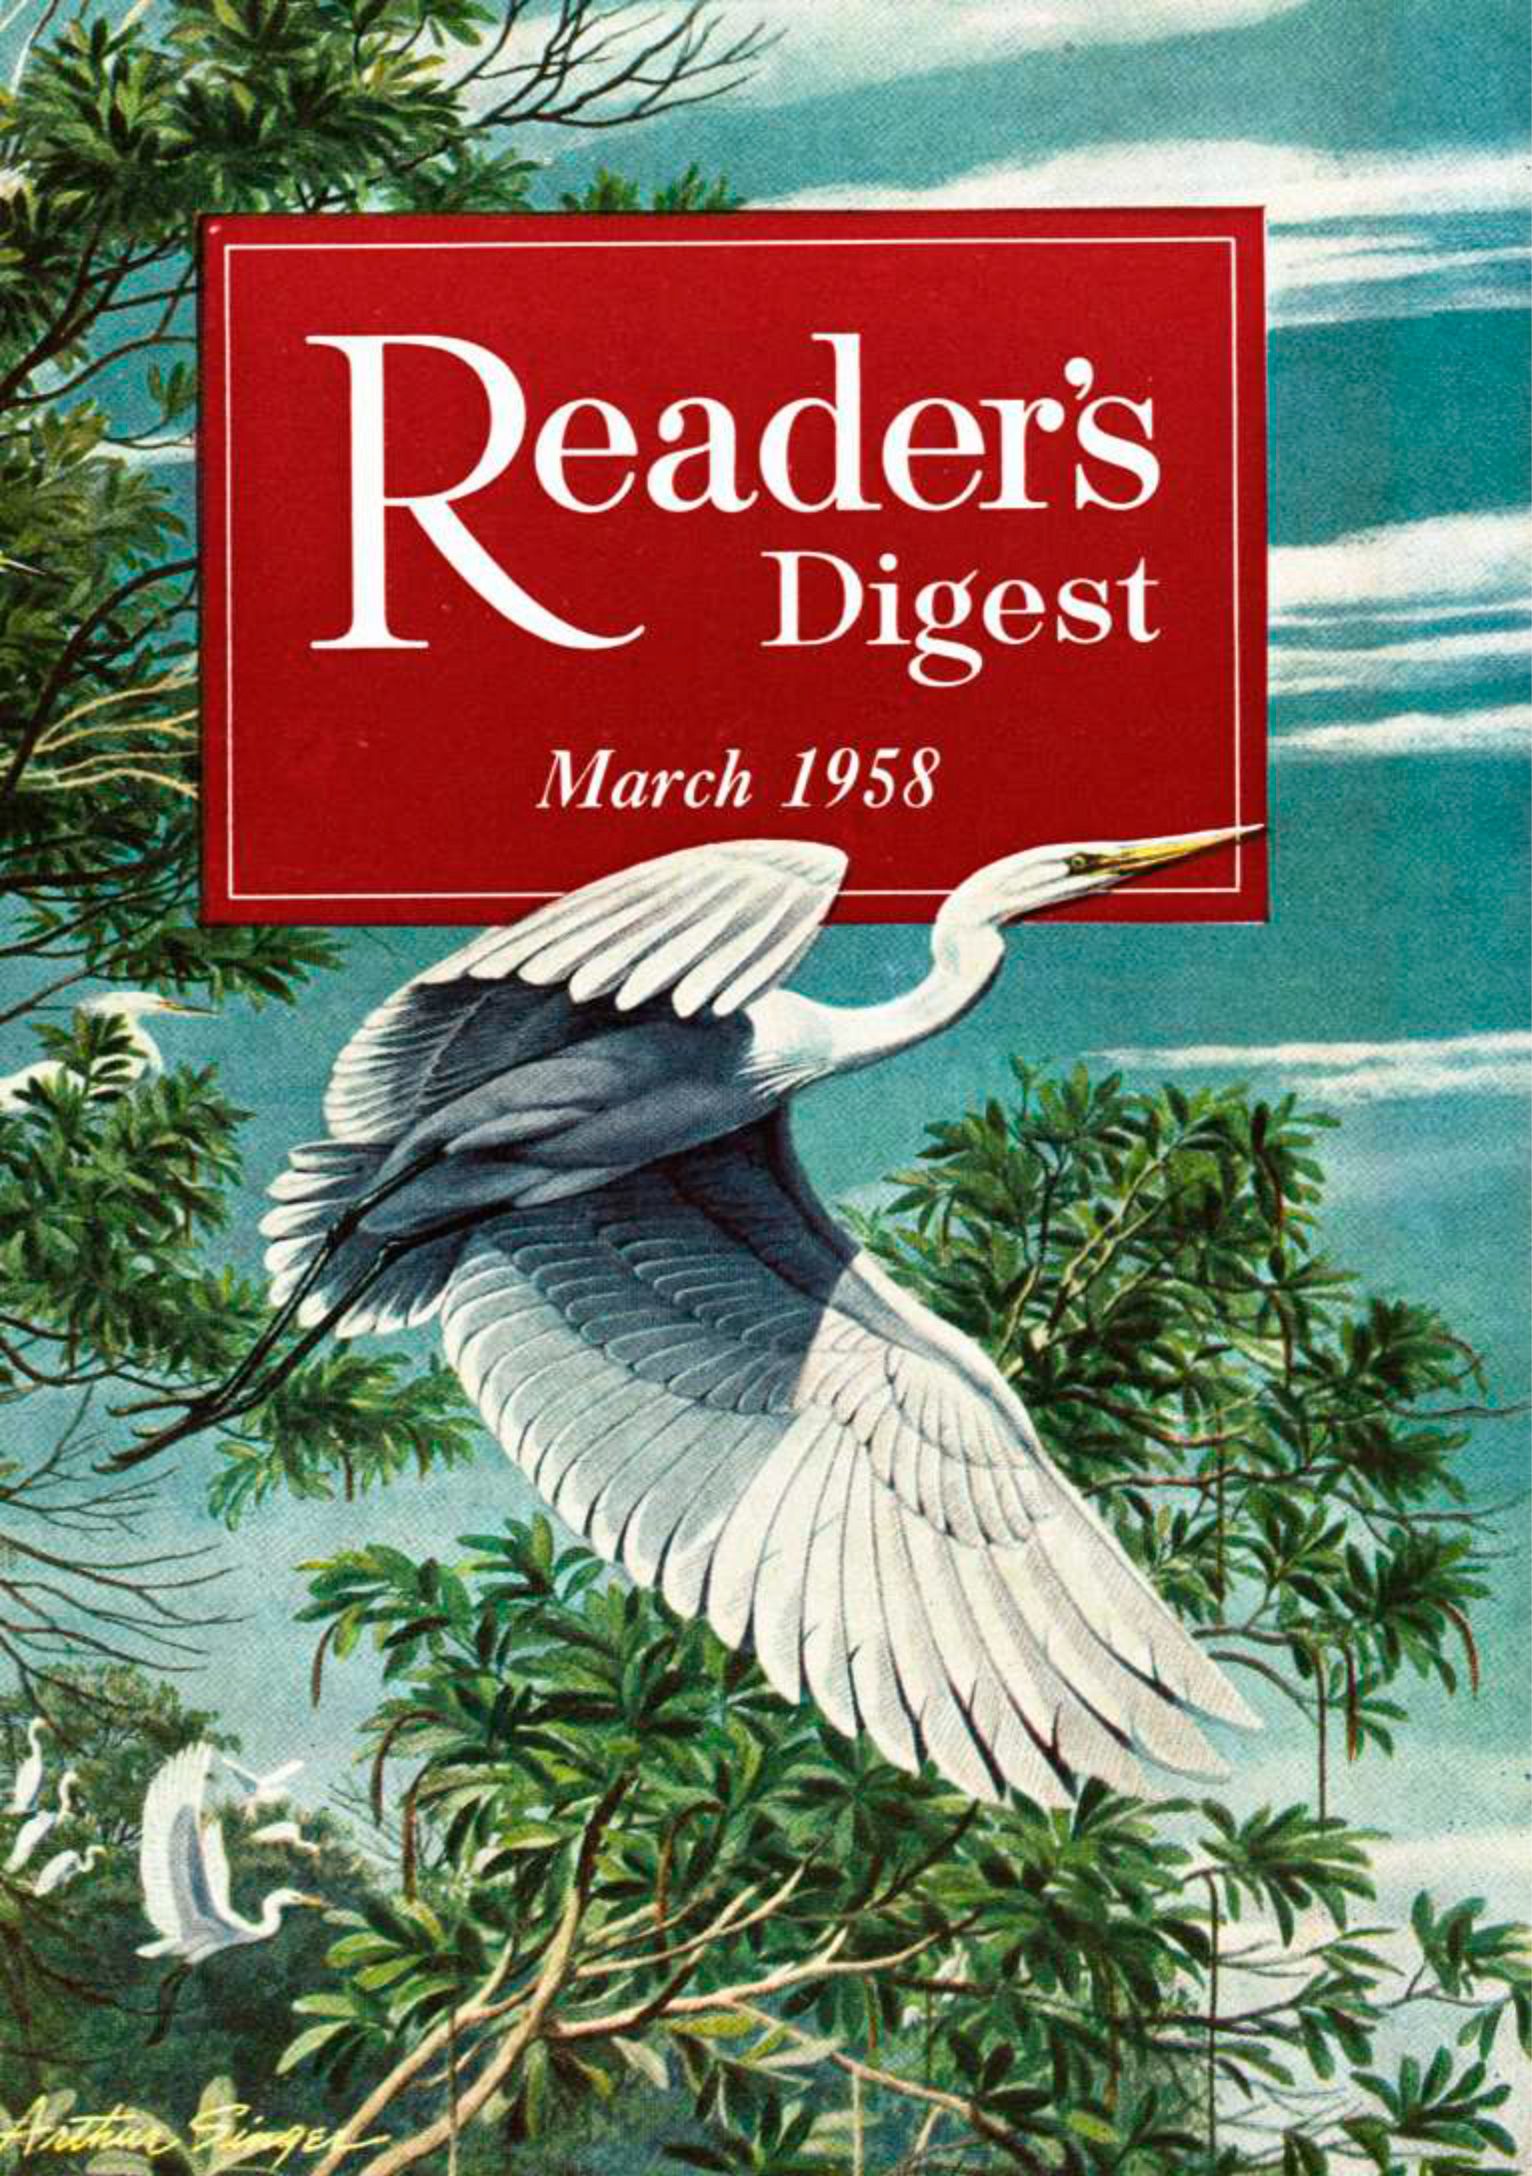 Vintage Reader S Digest Covers That Will Take You Back Reader S Digest